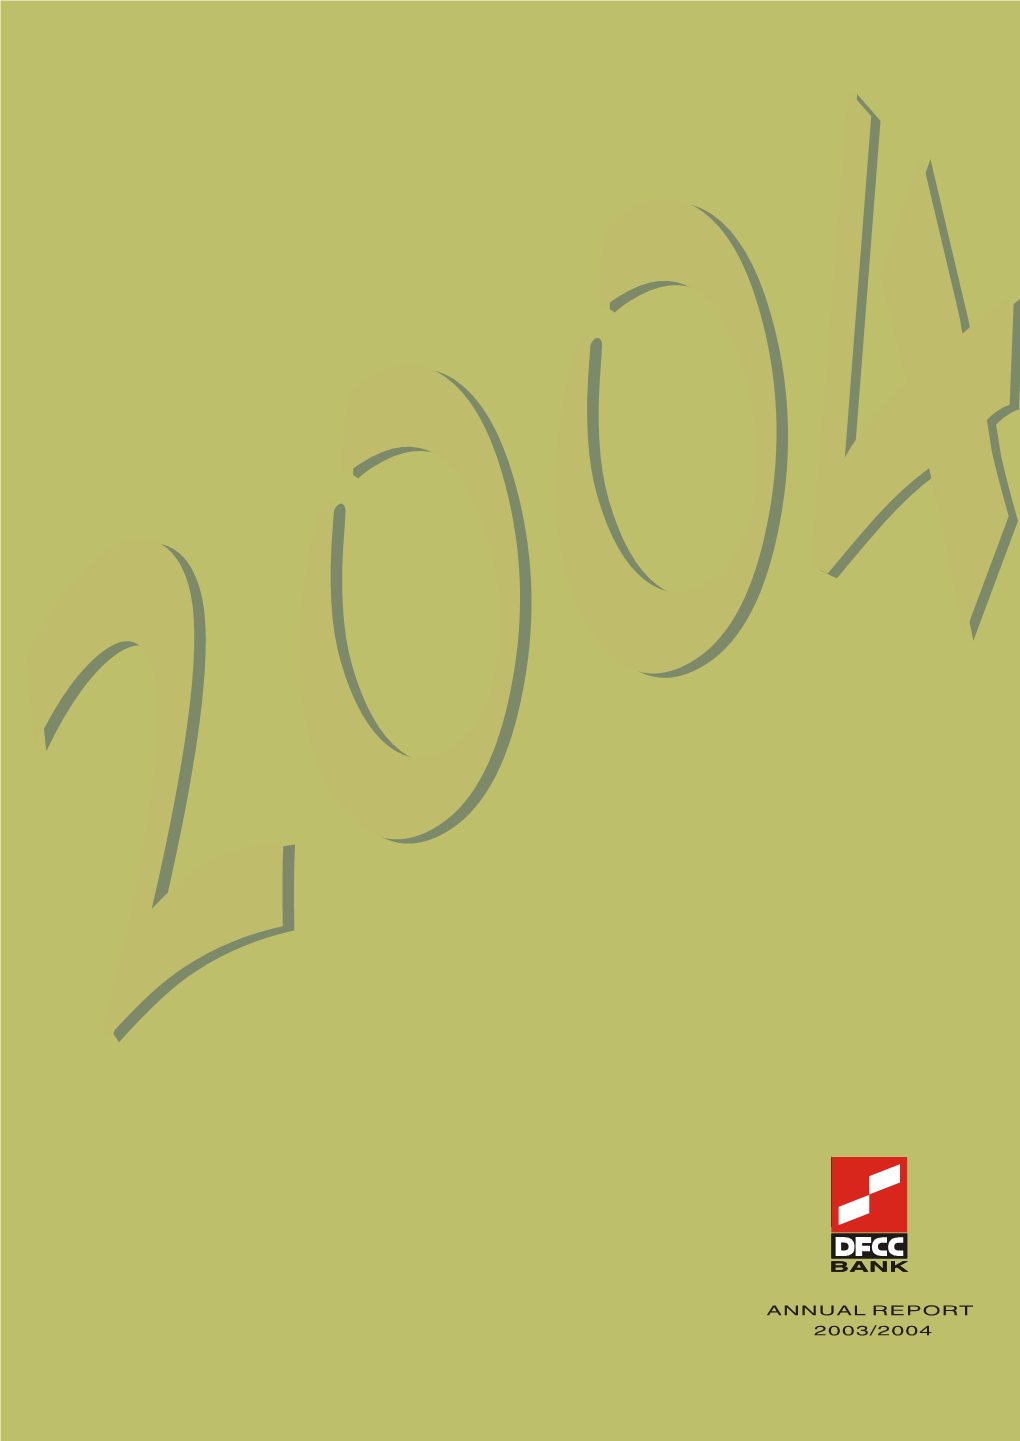 Bank Annual Report 2003/2004